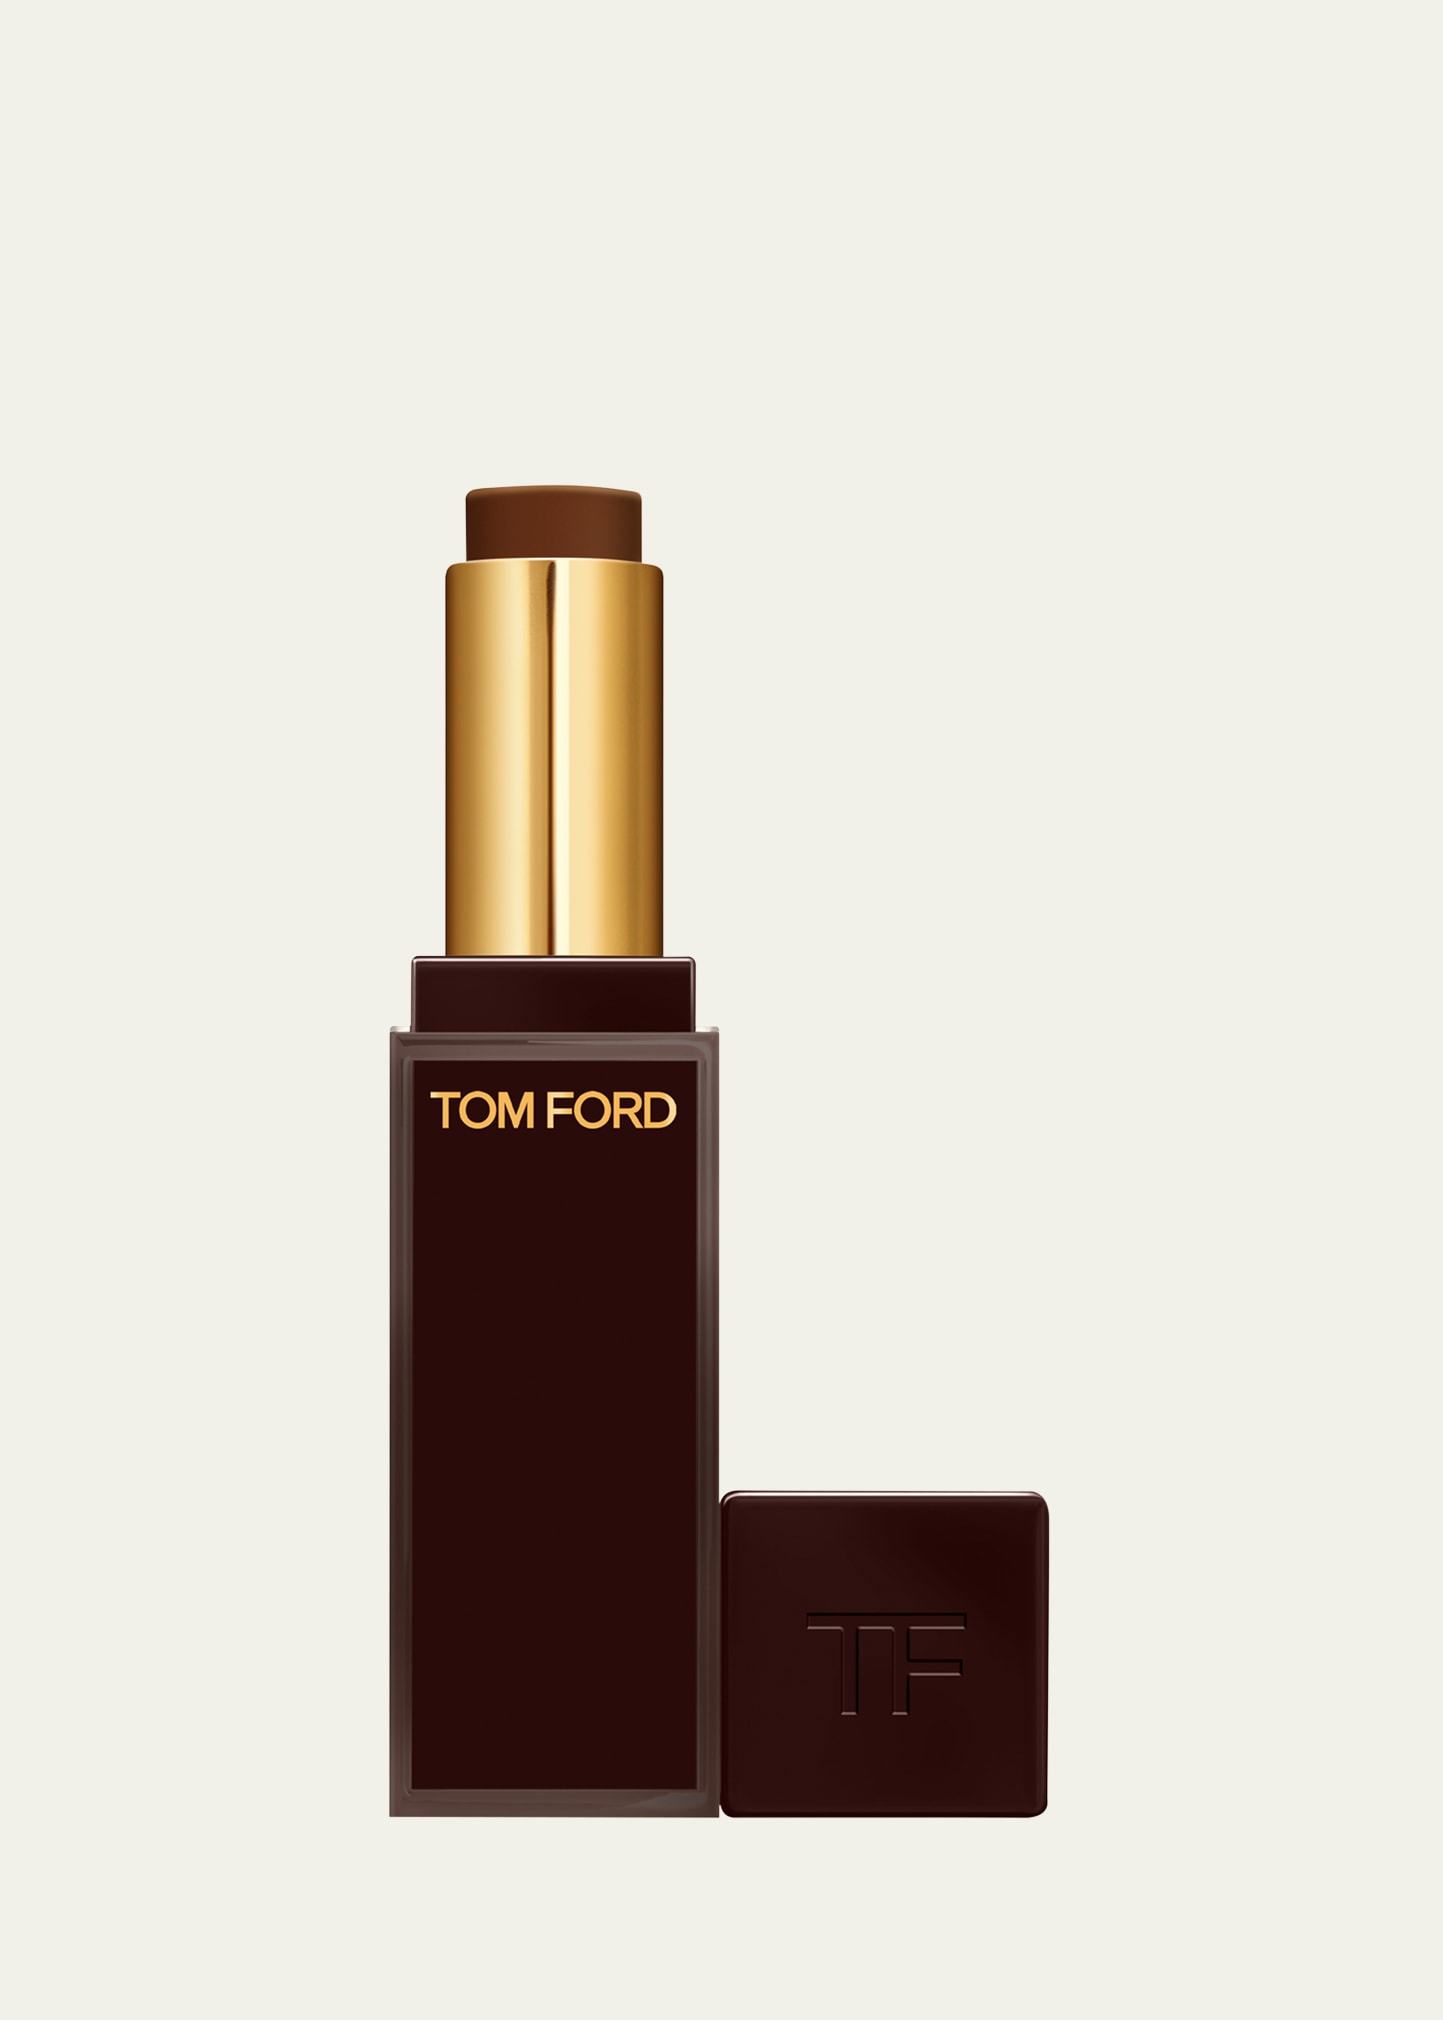 Tom Ford Traceless Soft Matte Concealer, 0.14 Oz. In 197w0 Cocoa